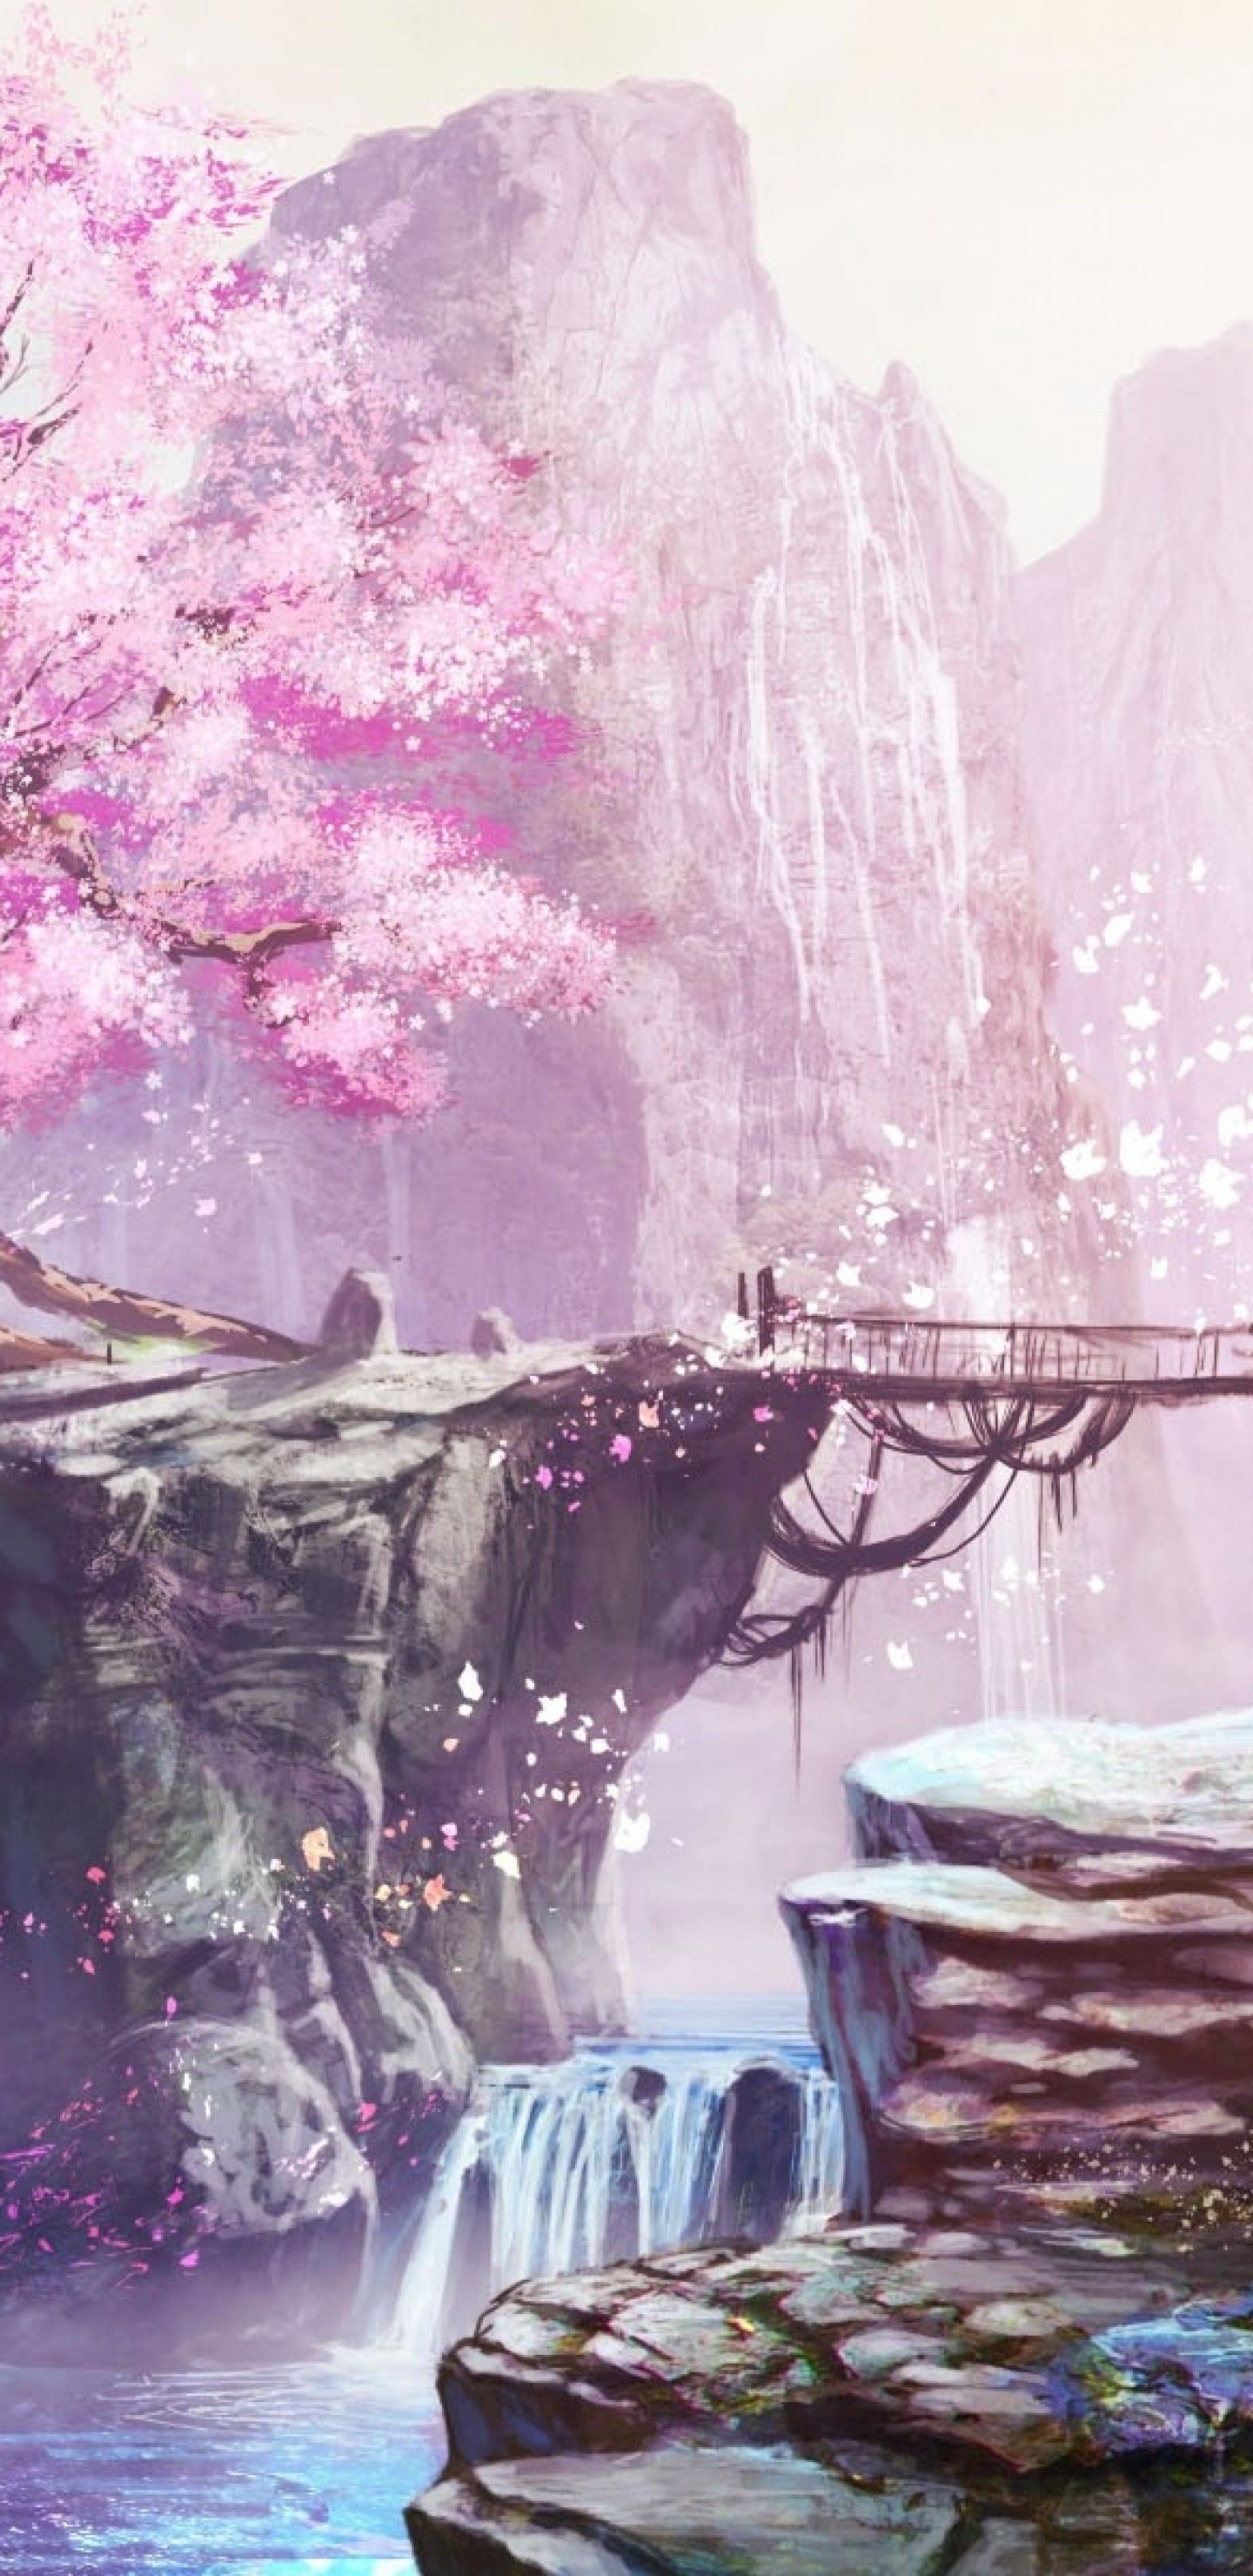 Anime Pink Scenery Wallpapers - Wallpaper Cave